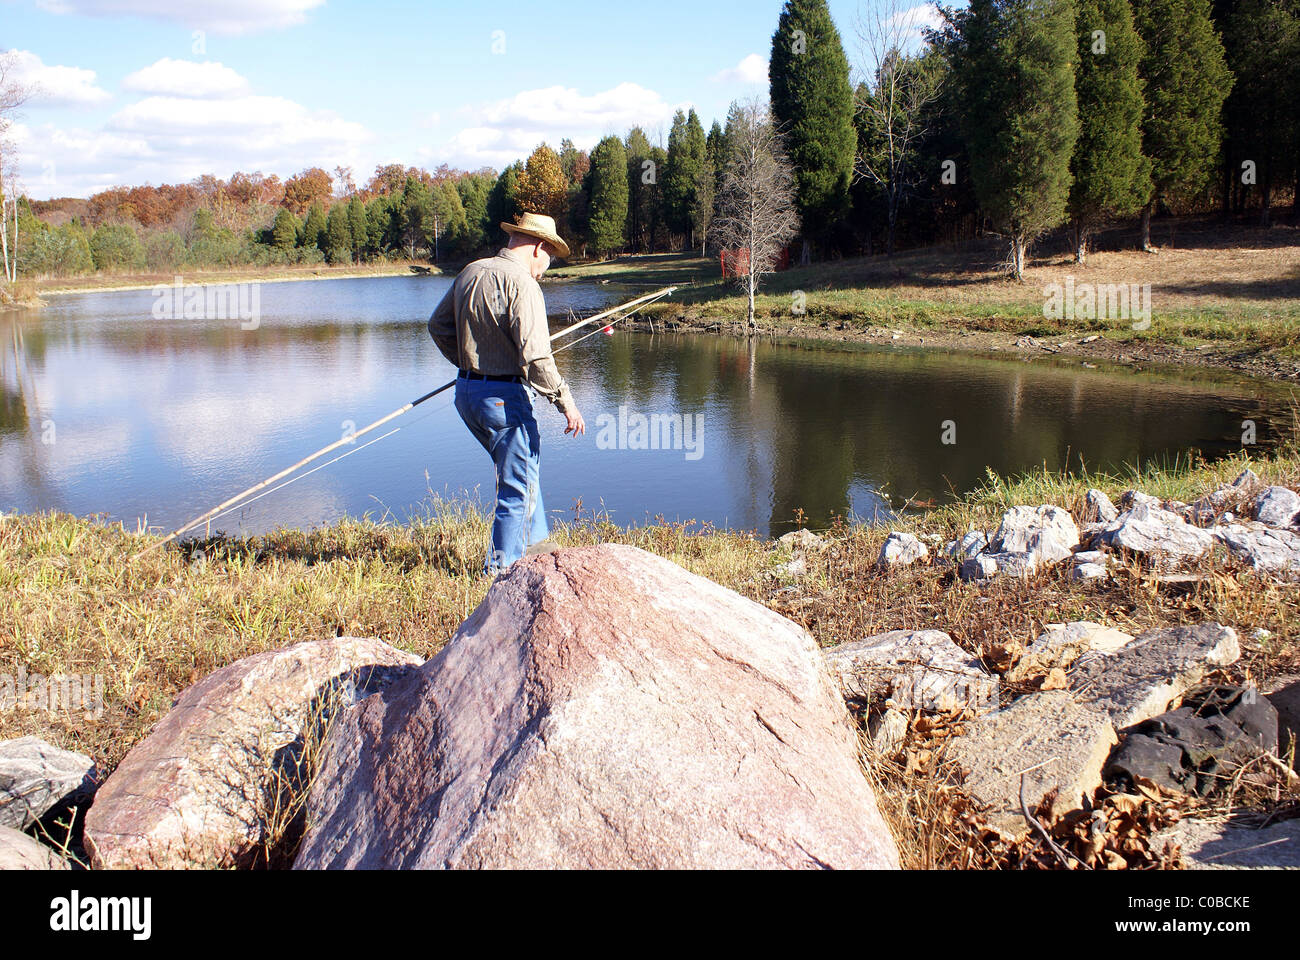 Man walks along lake looking for perfect fishing spot with cane pole. Stock Photo